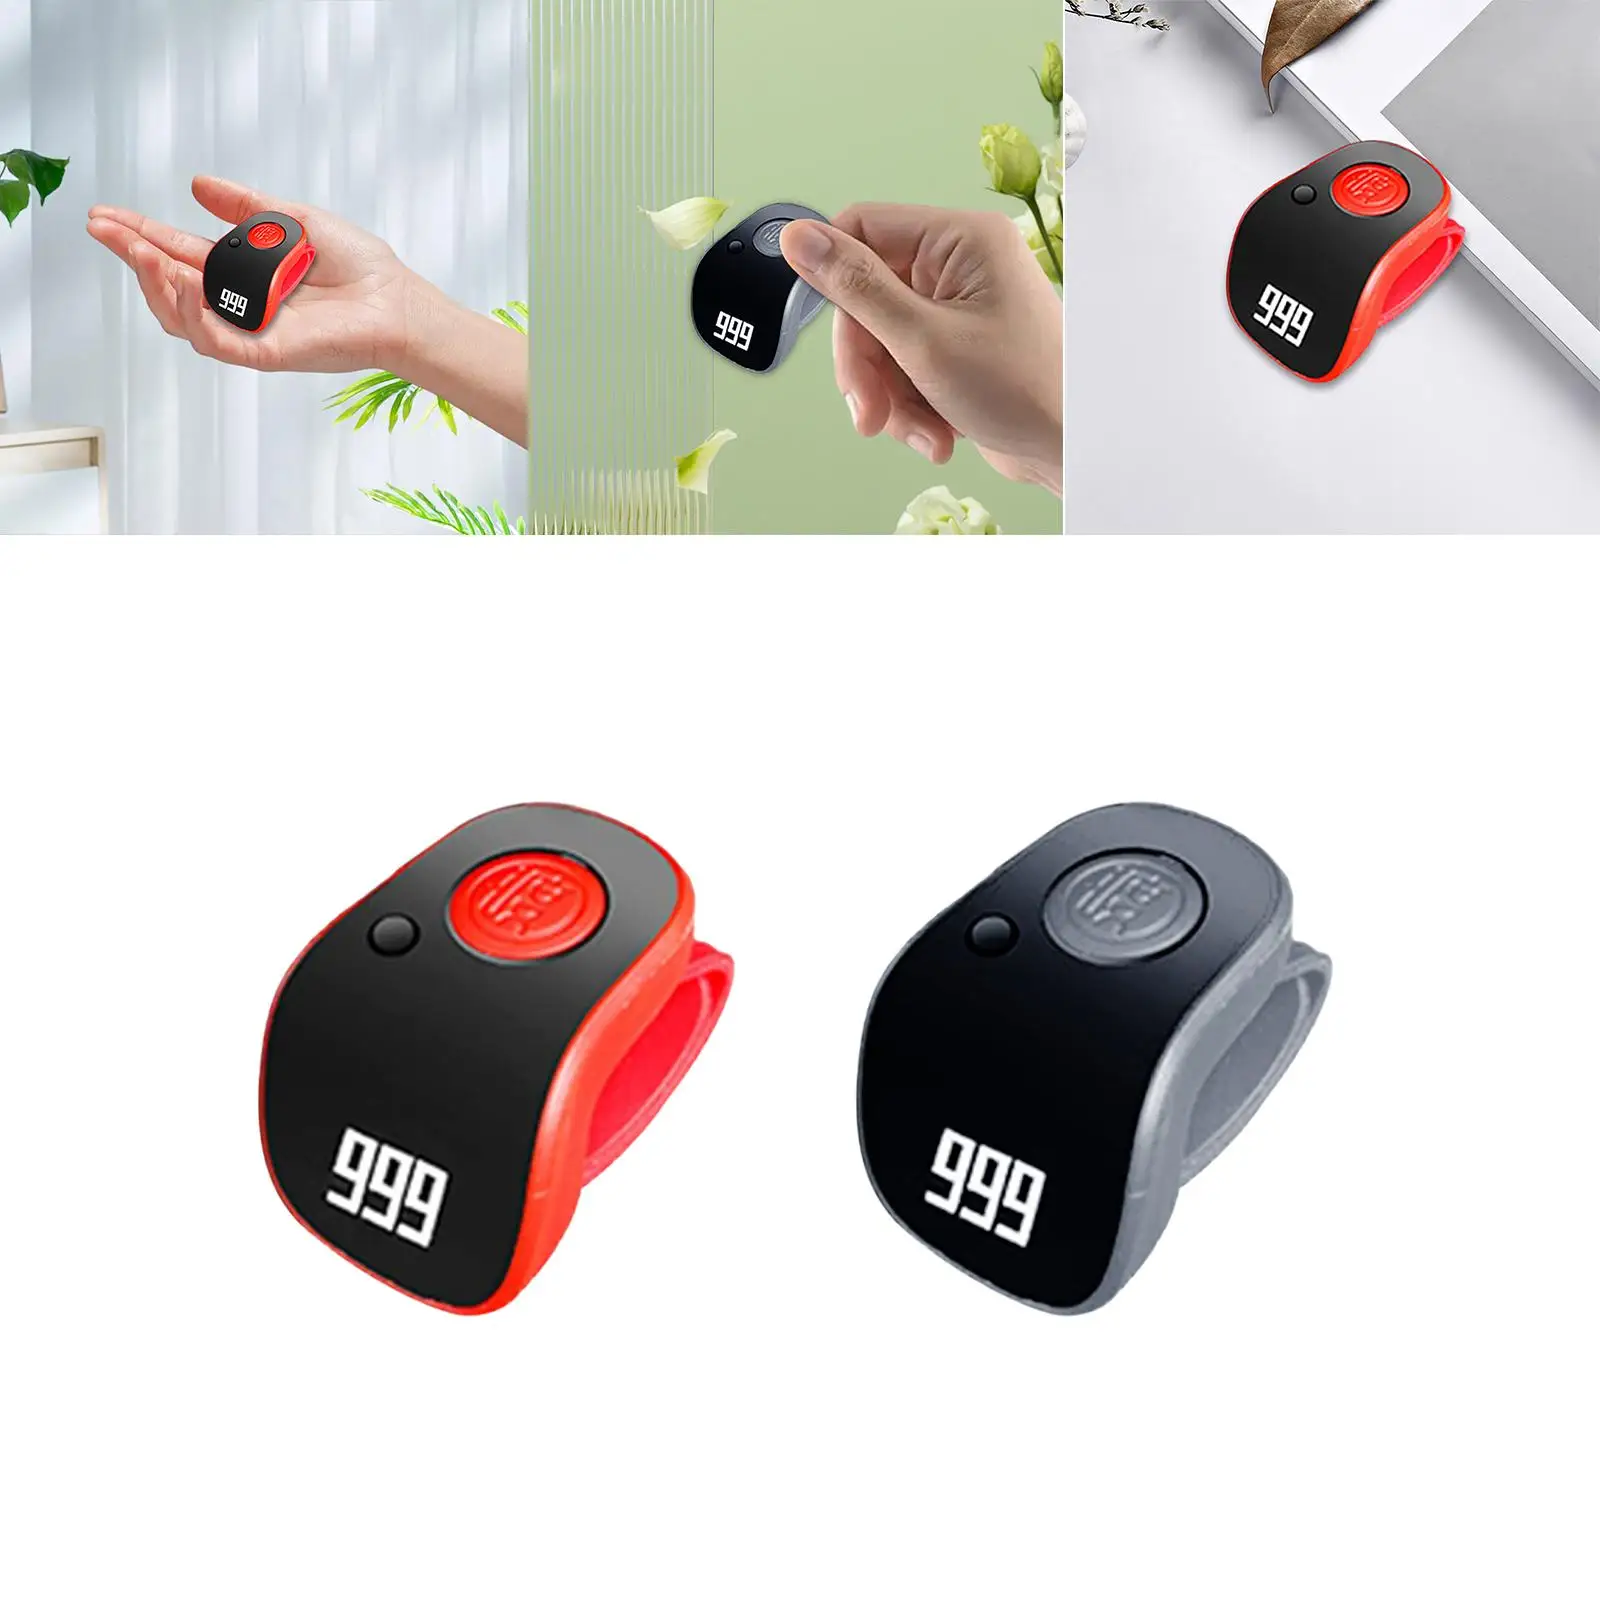 Count Tool Rechargeable Portable Smart Counting Electronic Counter for Office Accessories